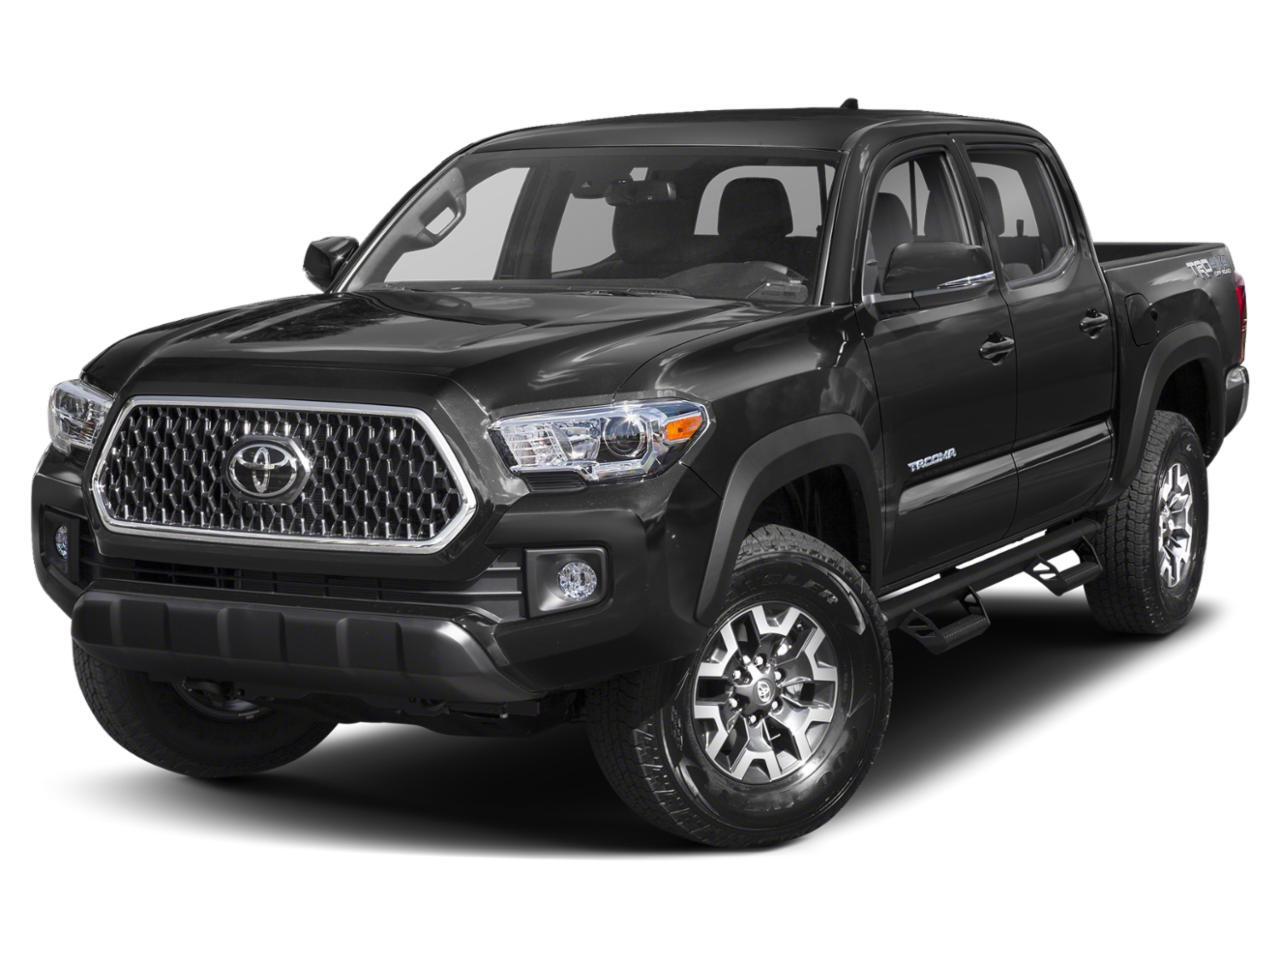 2019 Toyota Tacoma TRD Pro 4X4, One Owner, Navigation, Sunroof